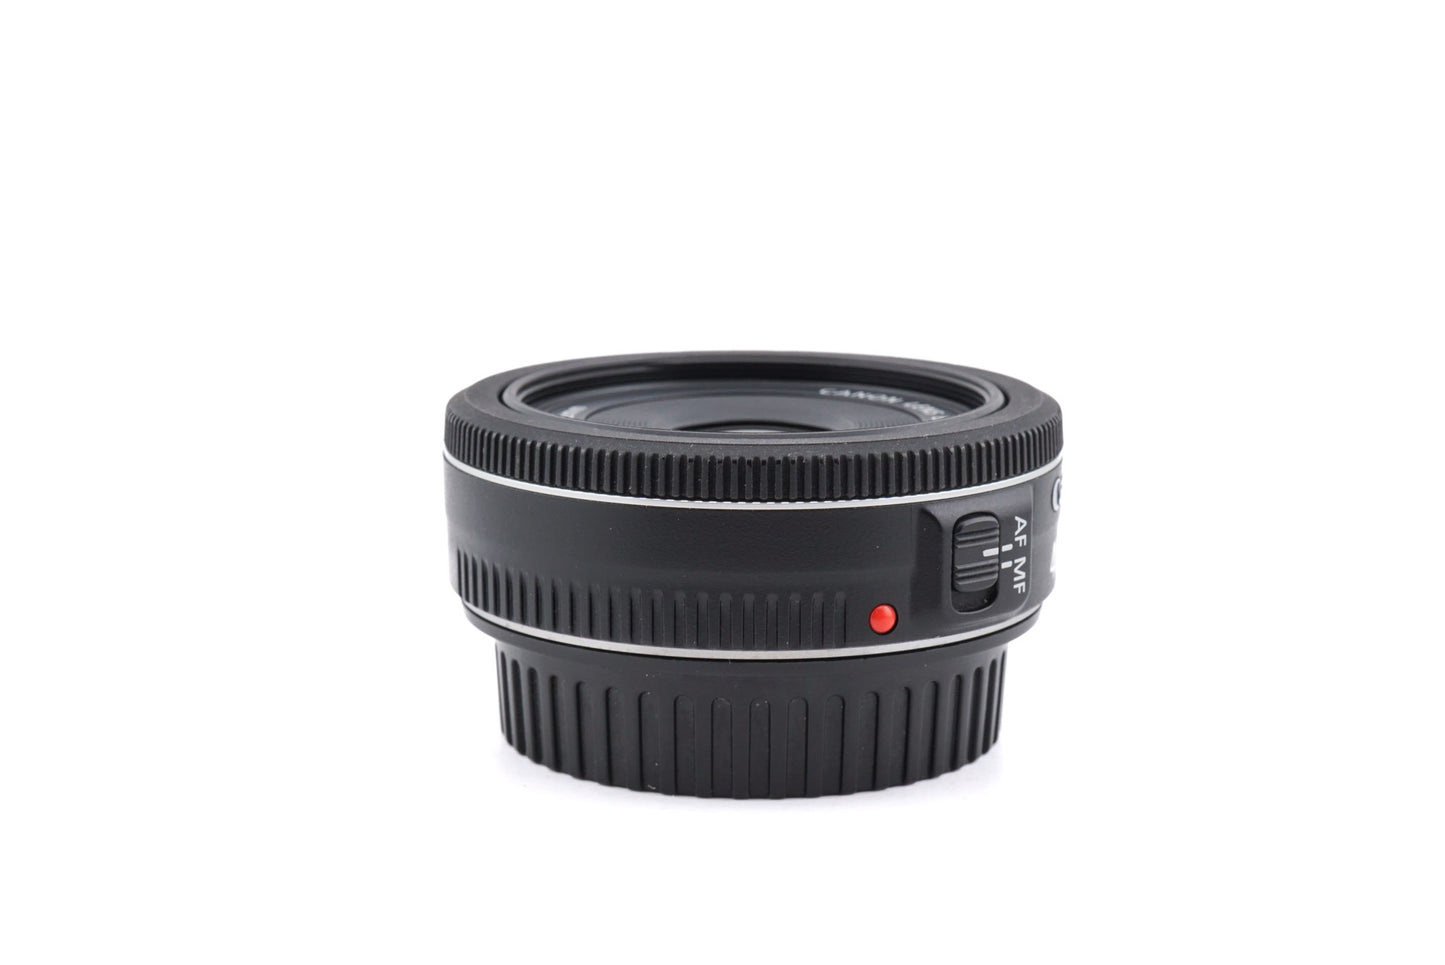 Canon 40mm f2.8 STM